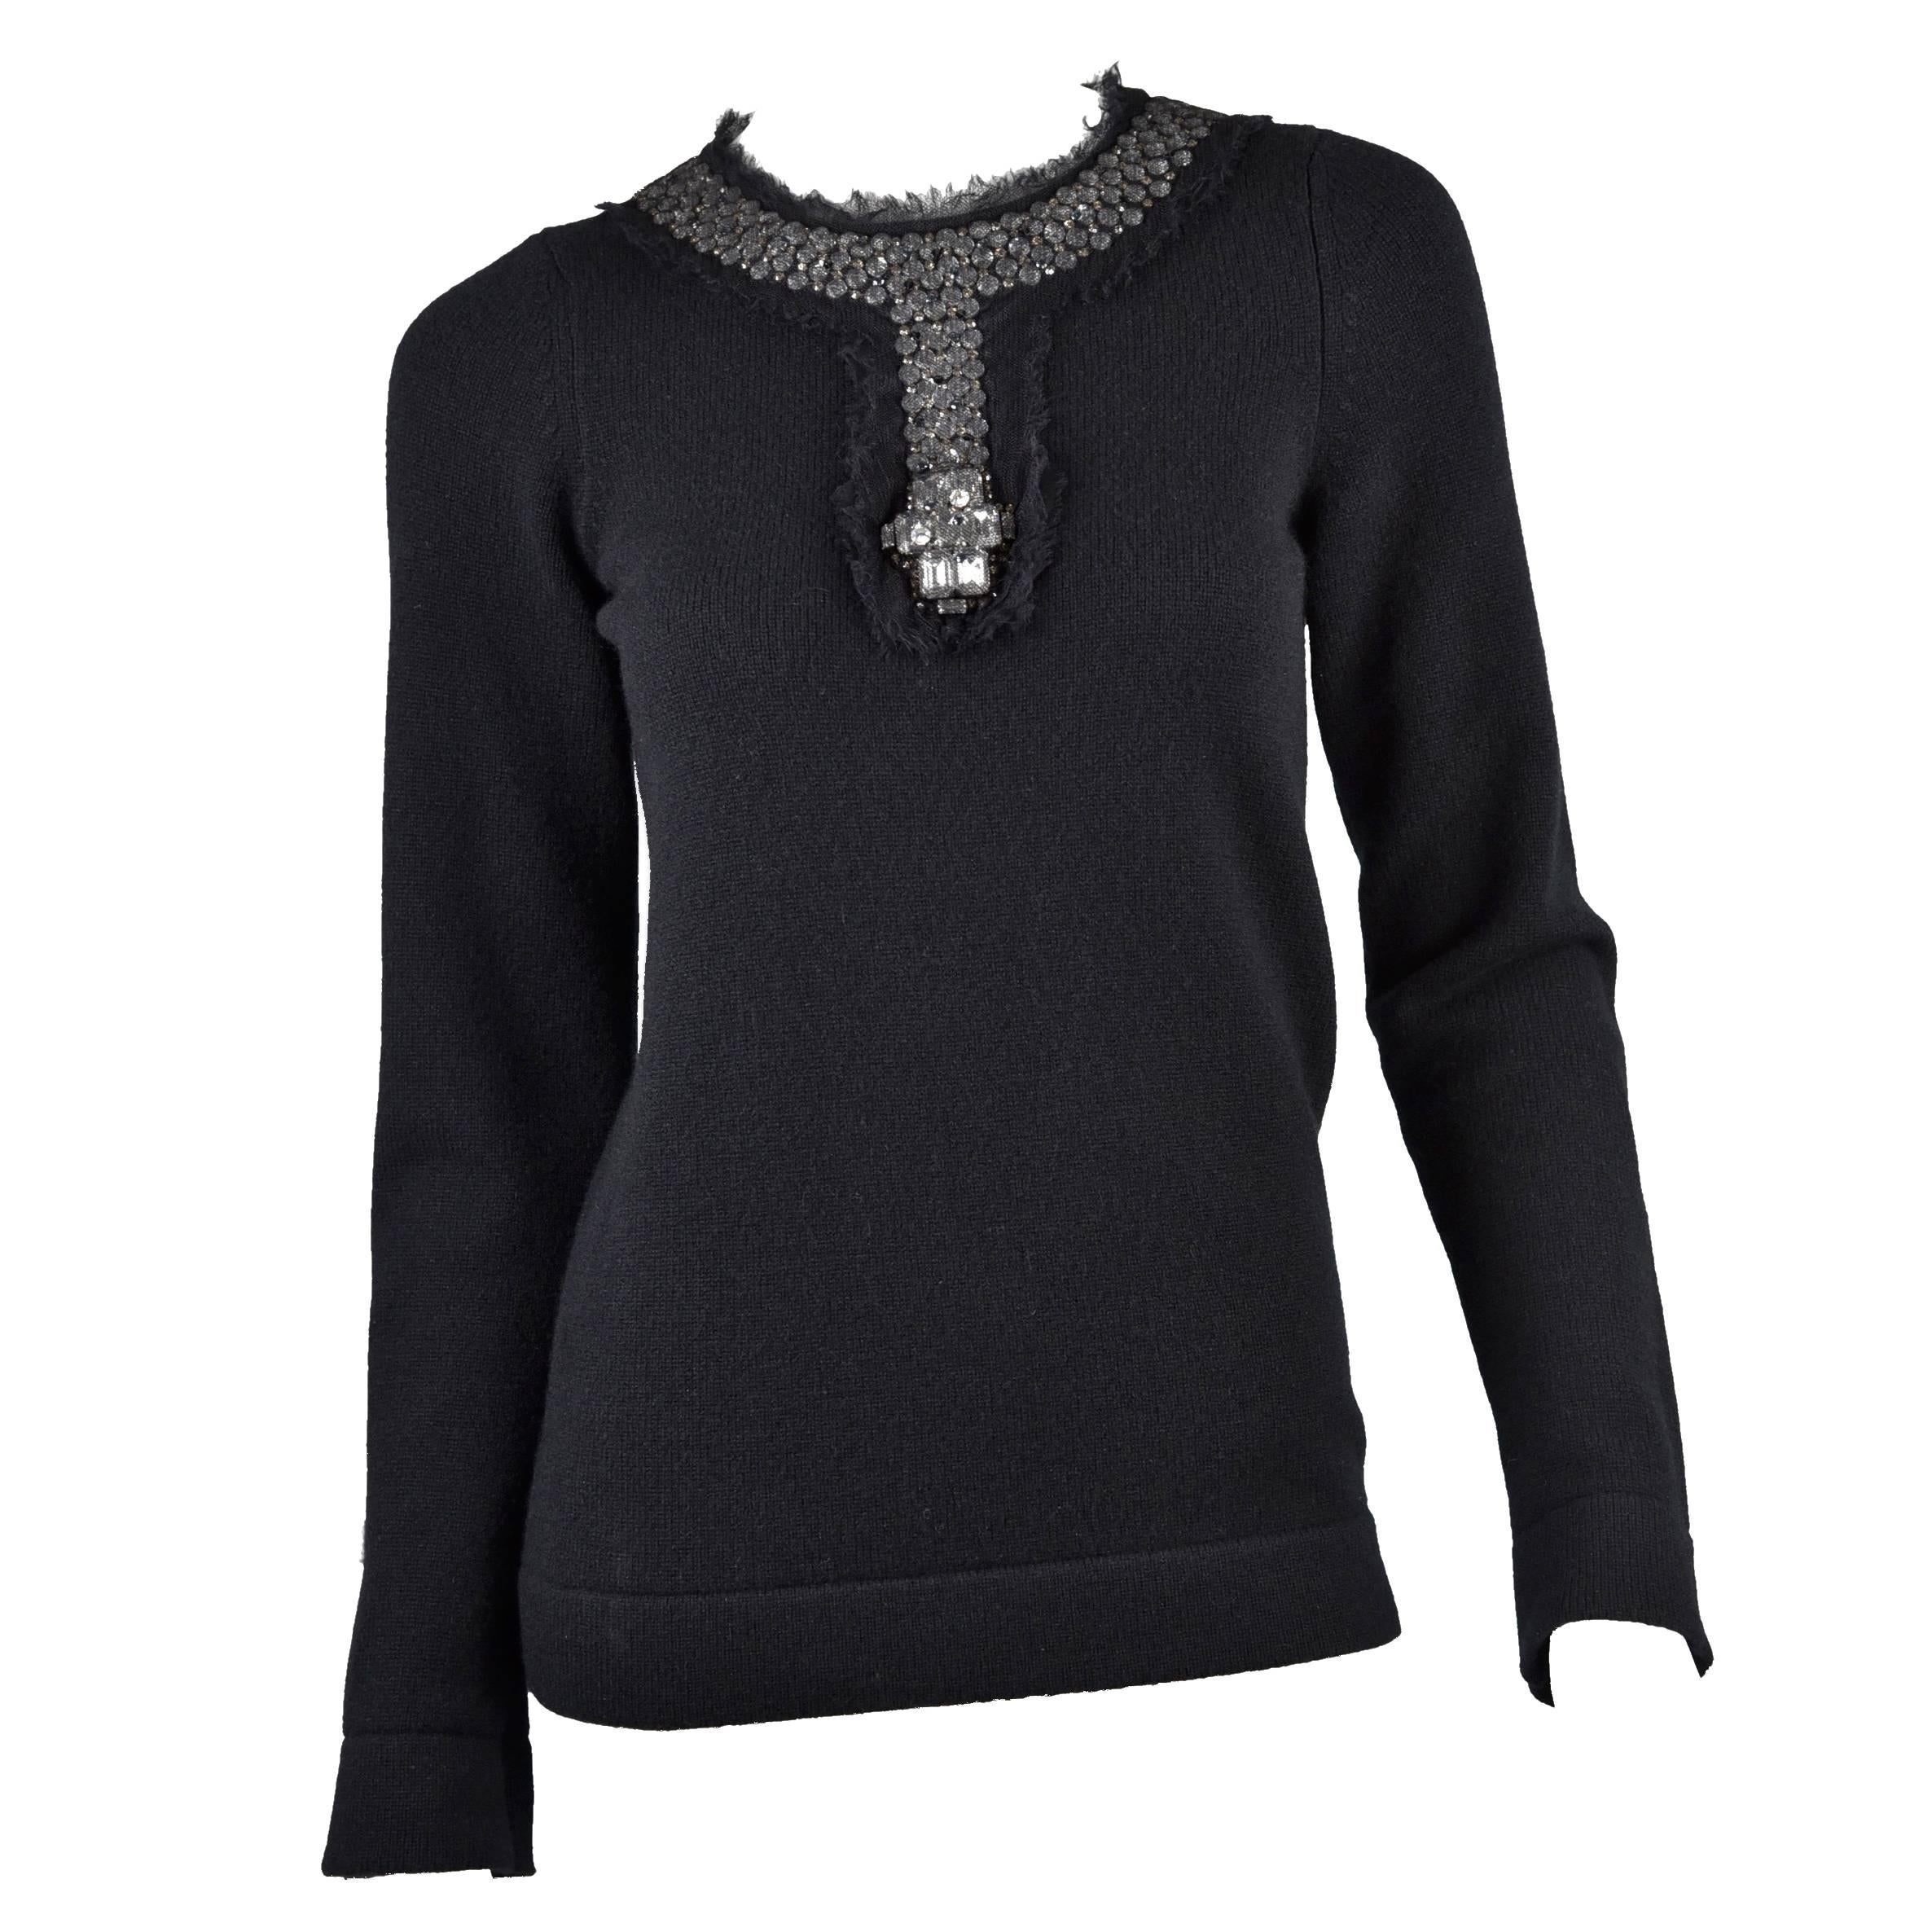 Chanel 1994 Black Cashmere Sweater with Large Elaborate Rhinestones in Mesh FR40 For Sale